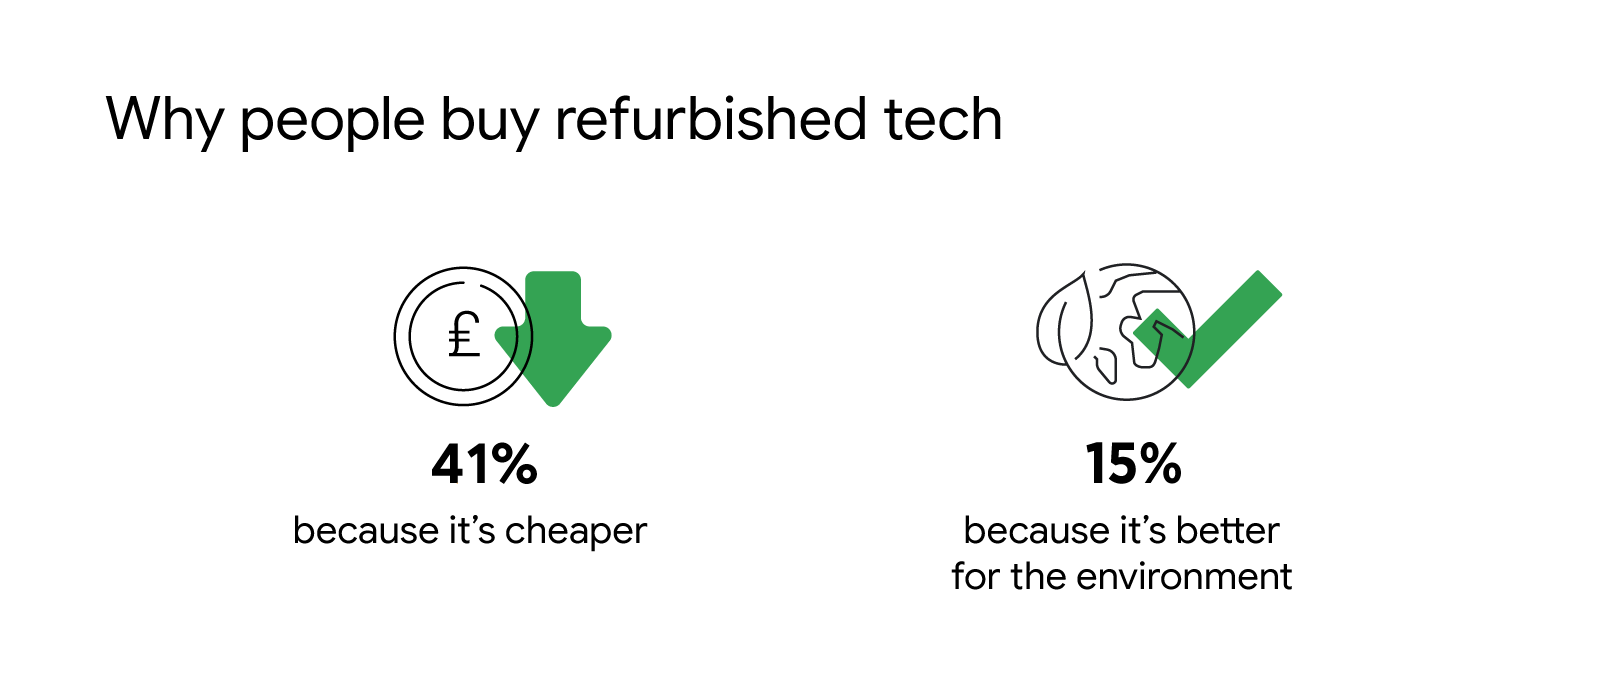 How to buy refurbished tech